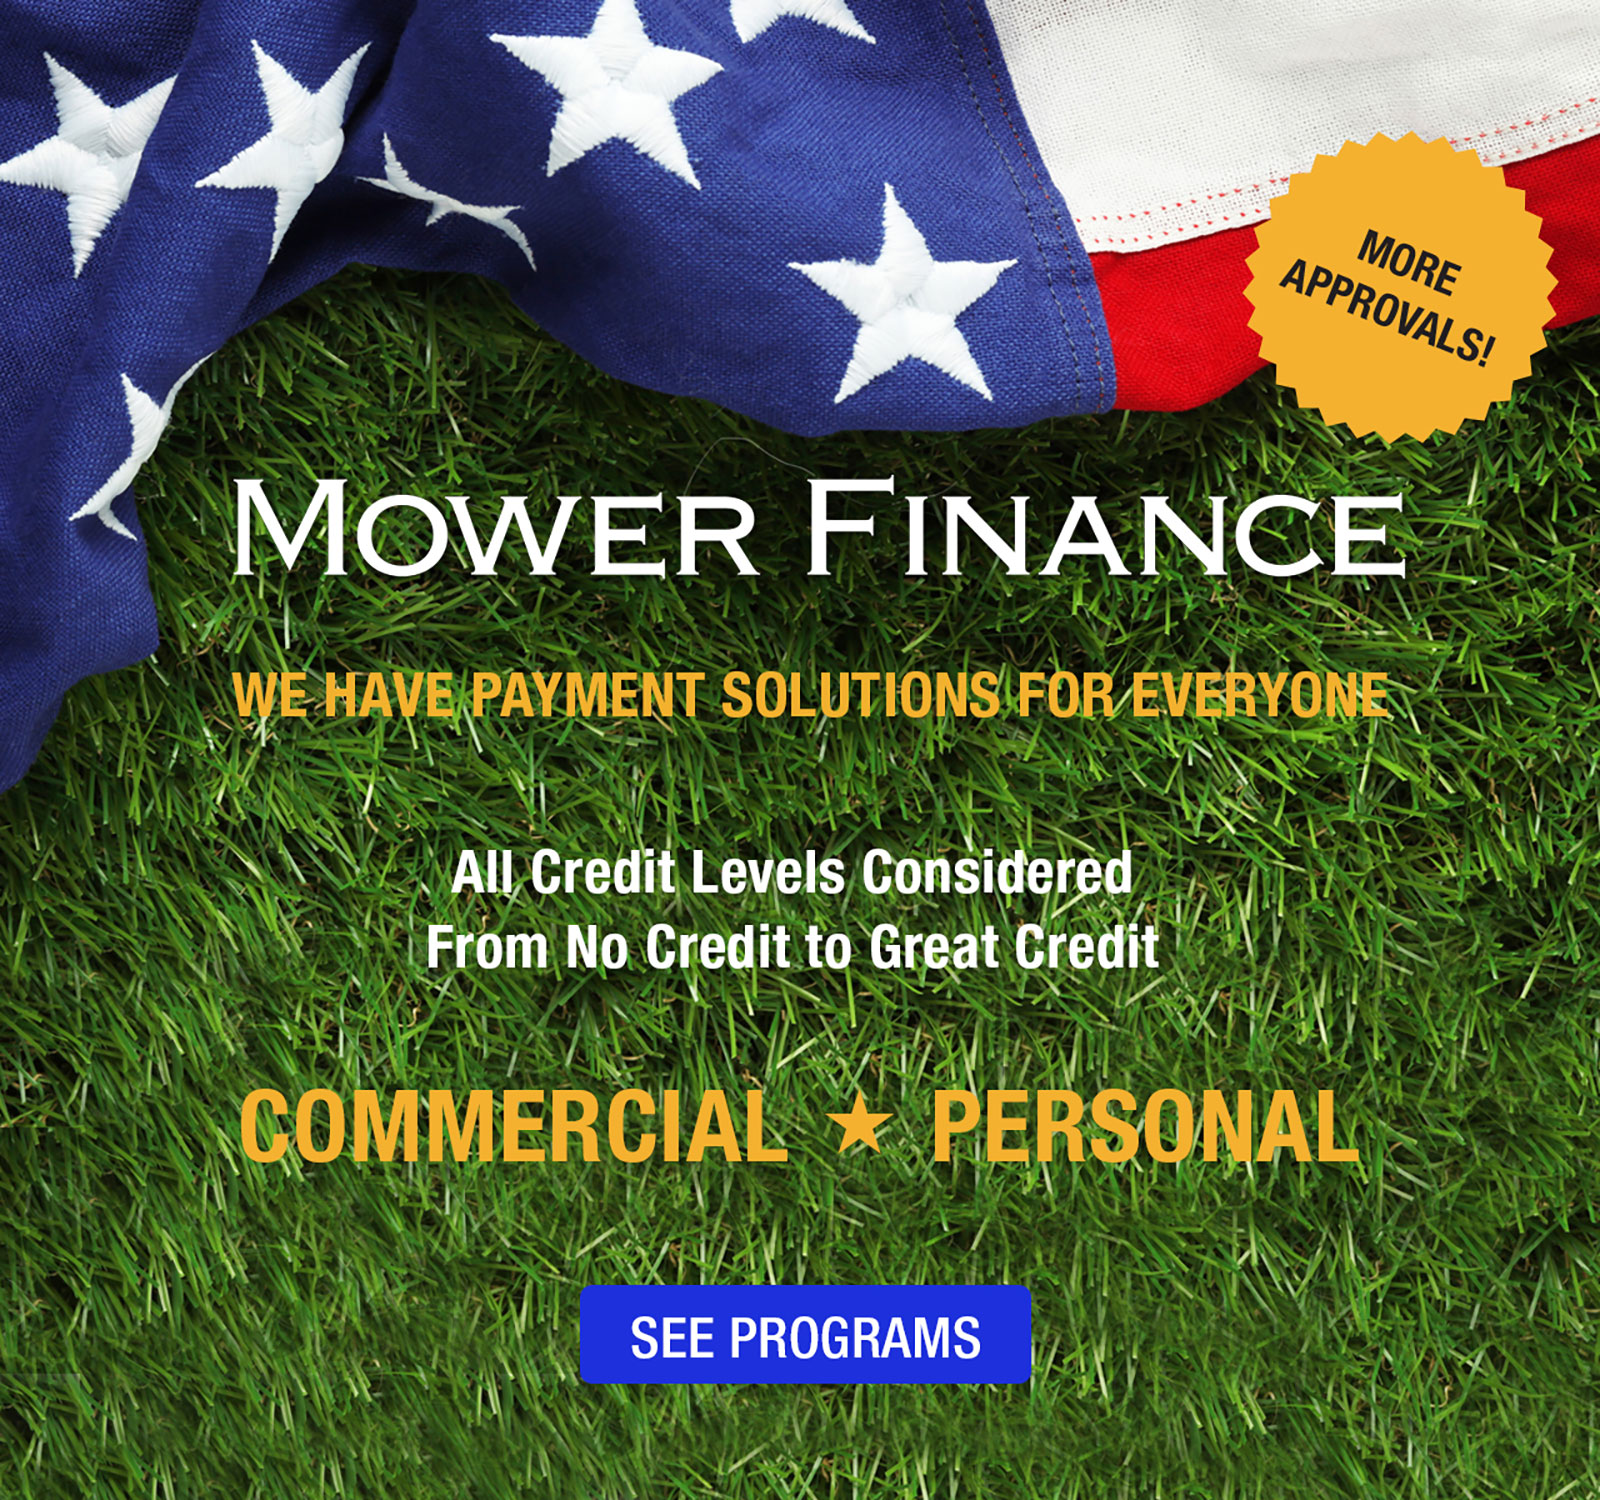 Learn More About Mower Finance